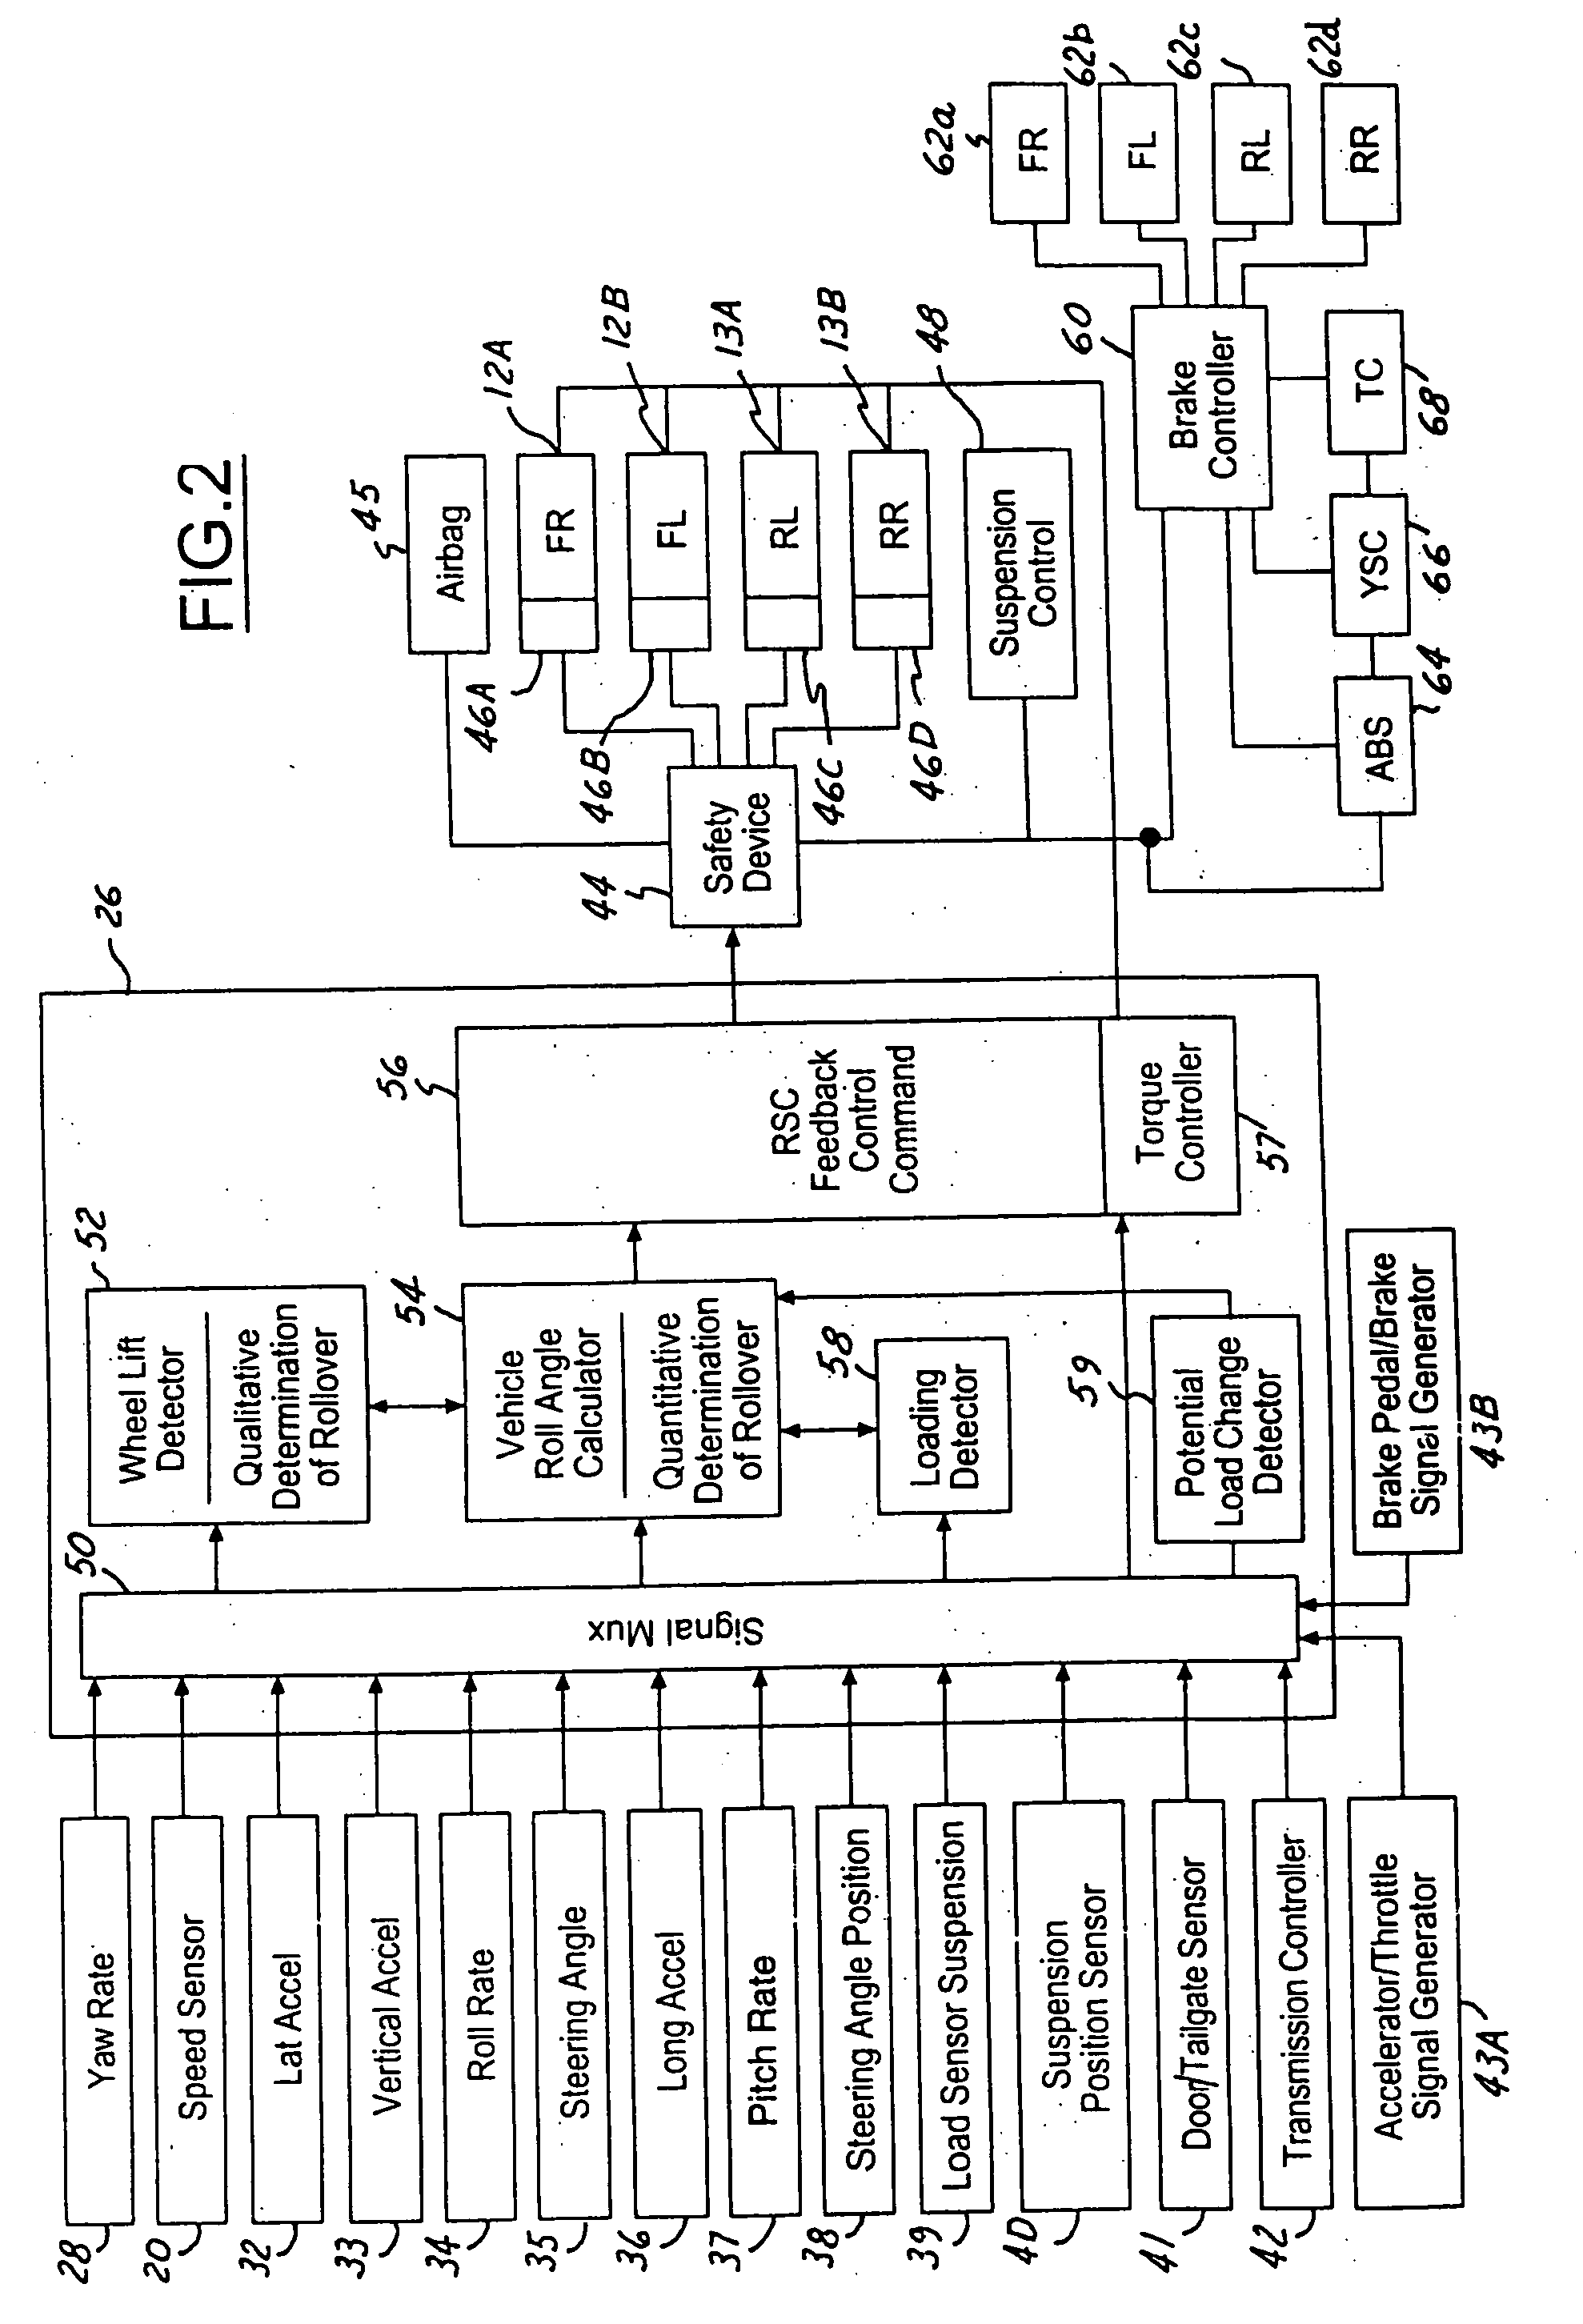 System and method for qualitatively determining vehicle loading conditions